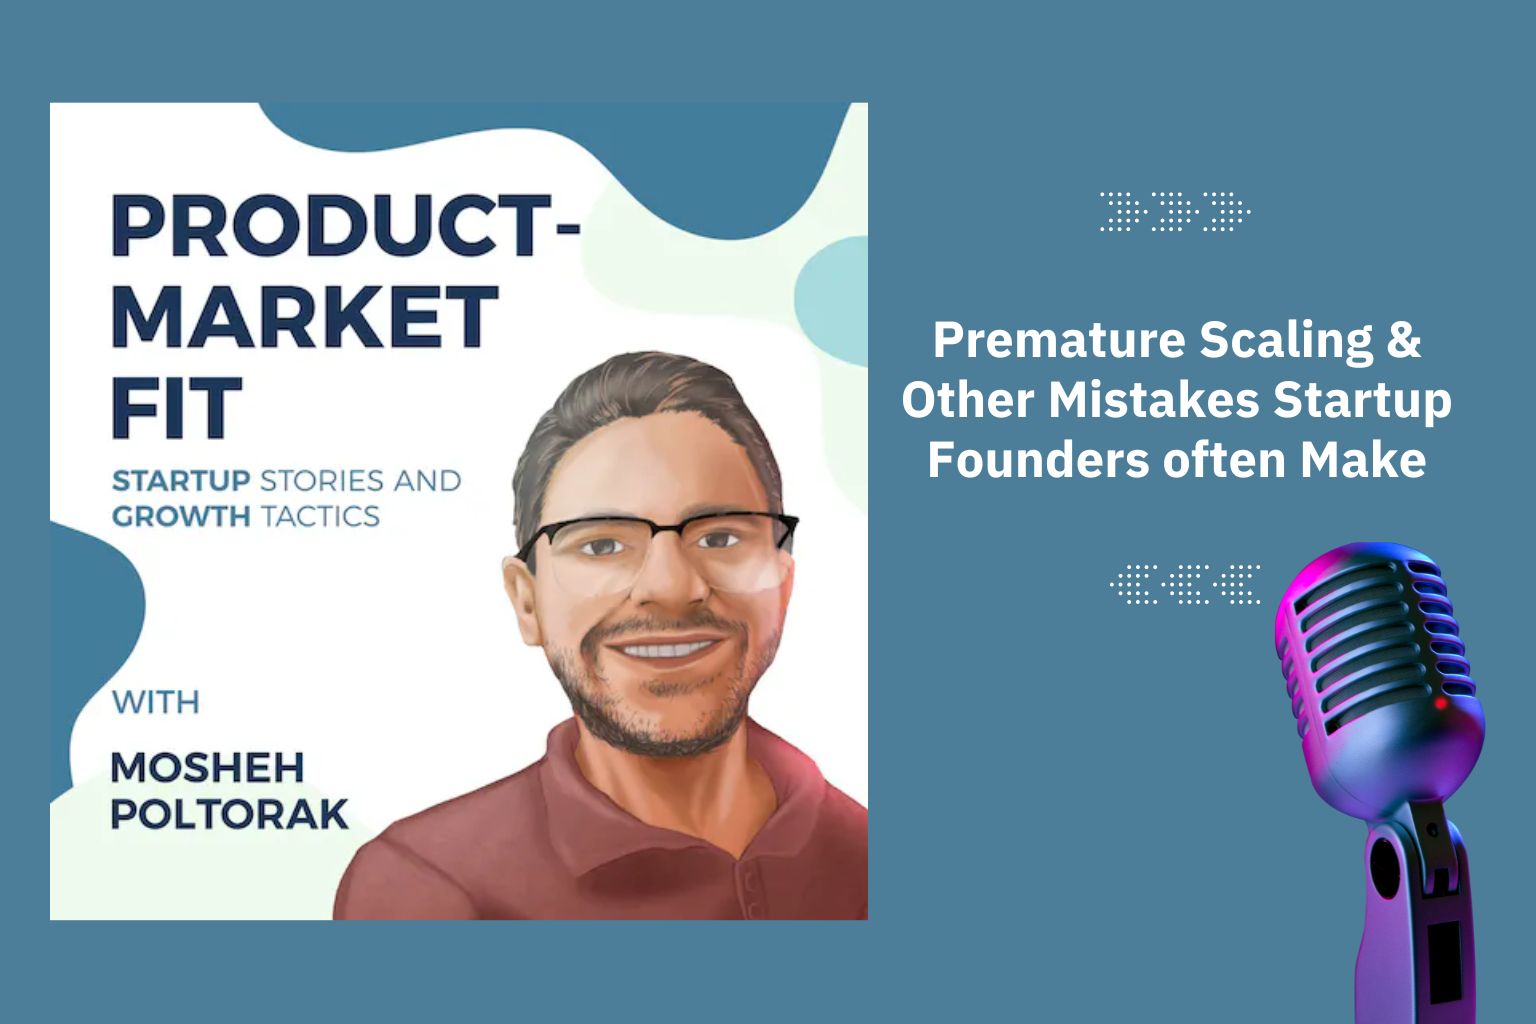 Premature Scaling and Other Mistakes Startup Founders Often Make